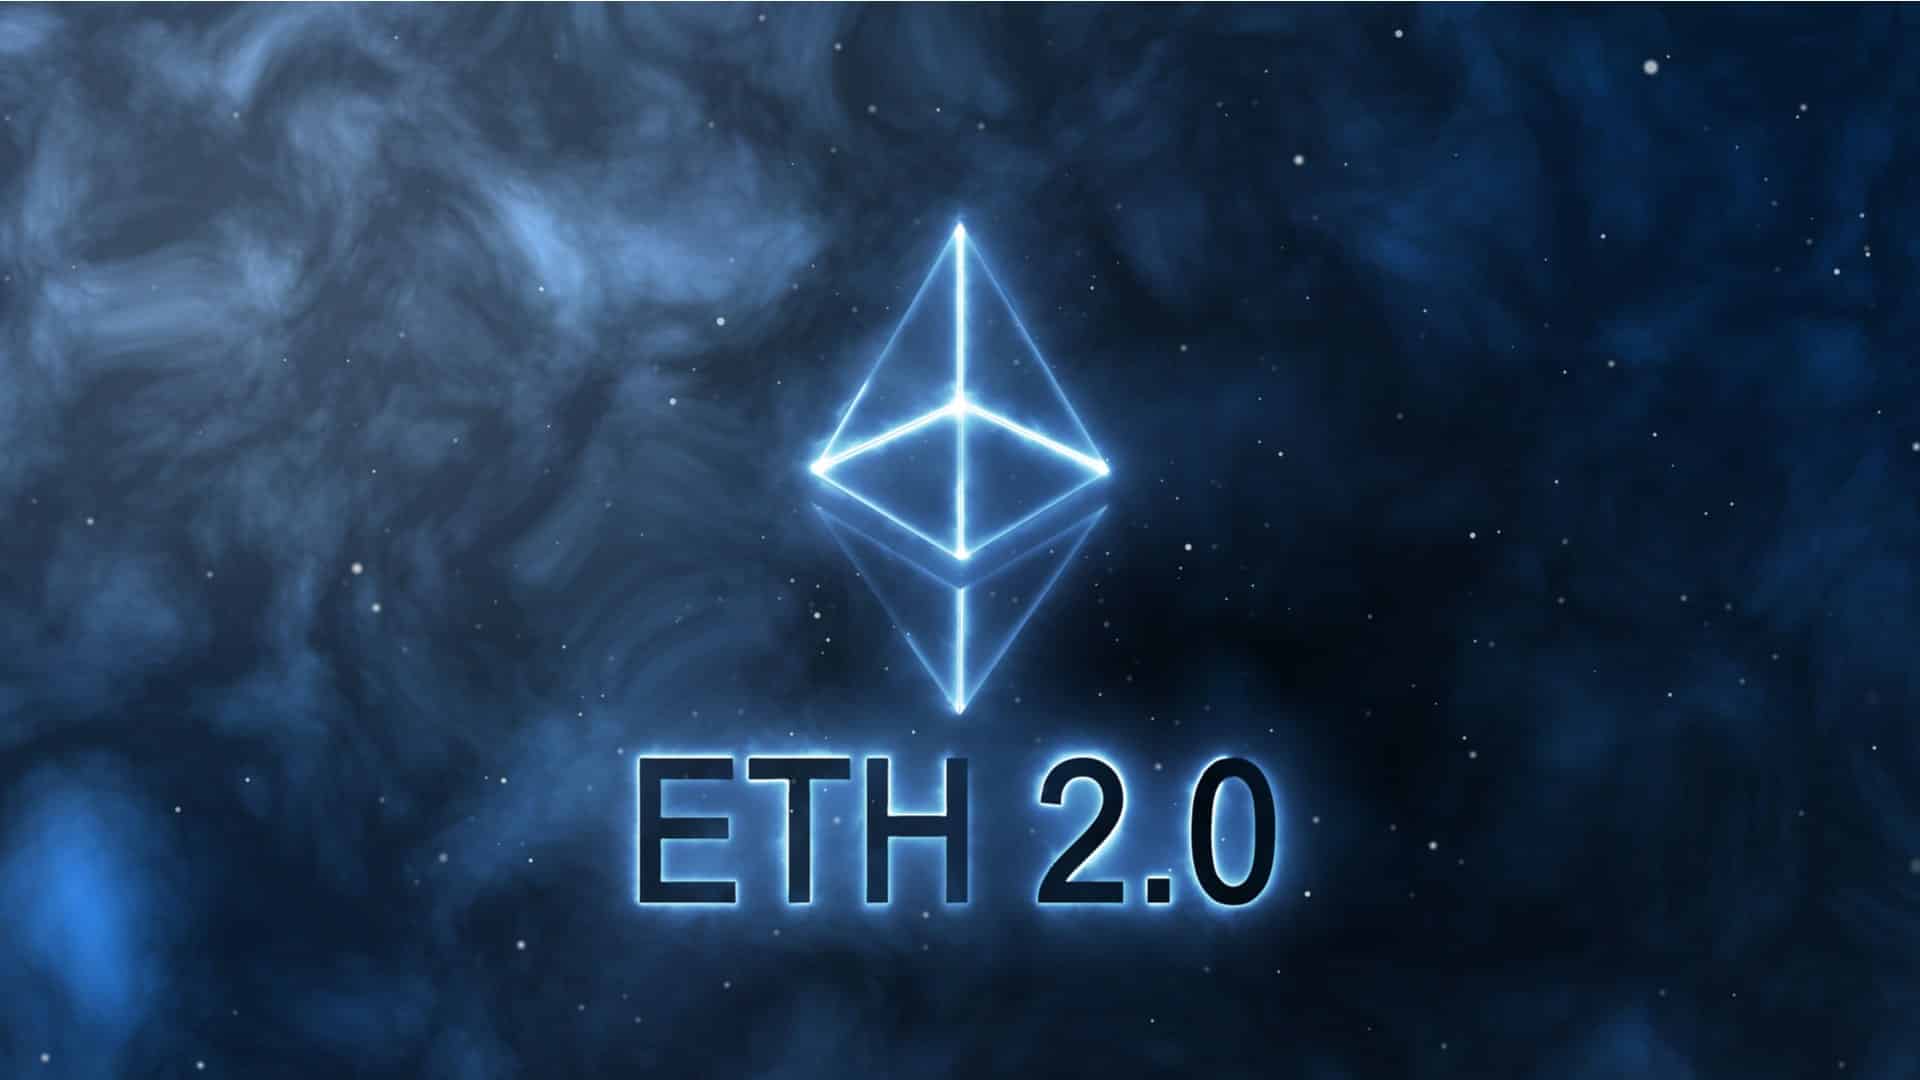 The transition to ETH 2.0 is one step closer